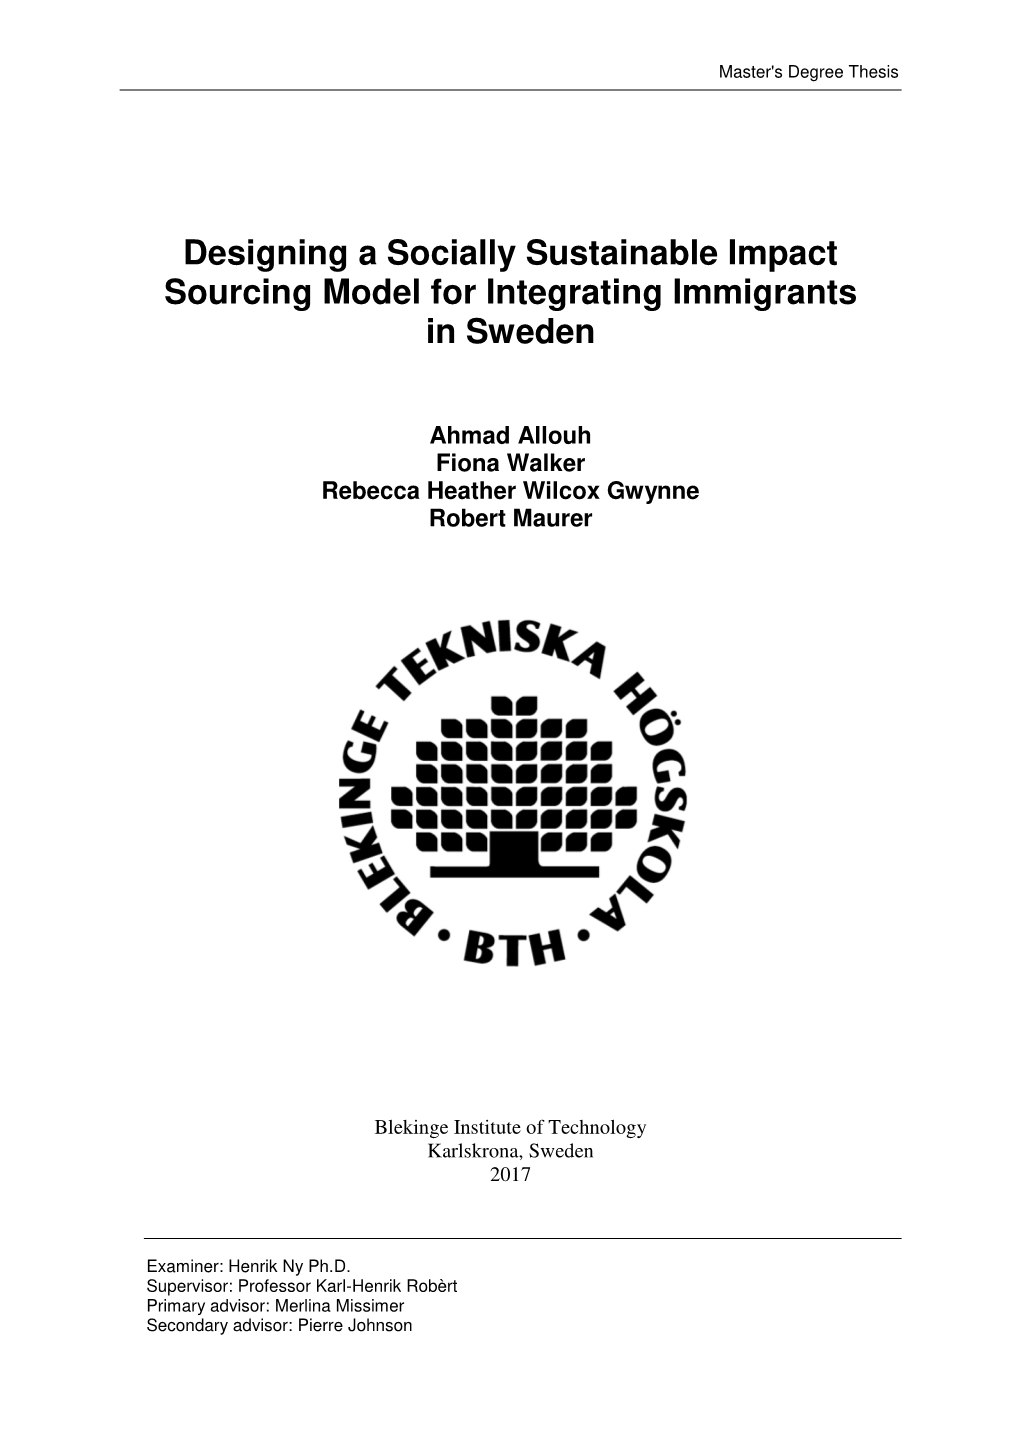 Designing a Socially Sustainable Impact Sourcing Model for Integrating Immigrants in Sweden